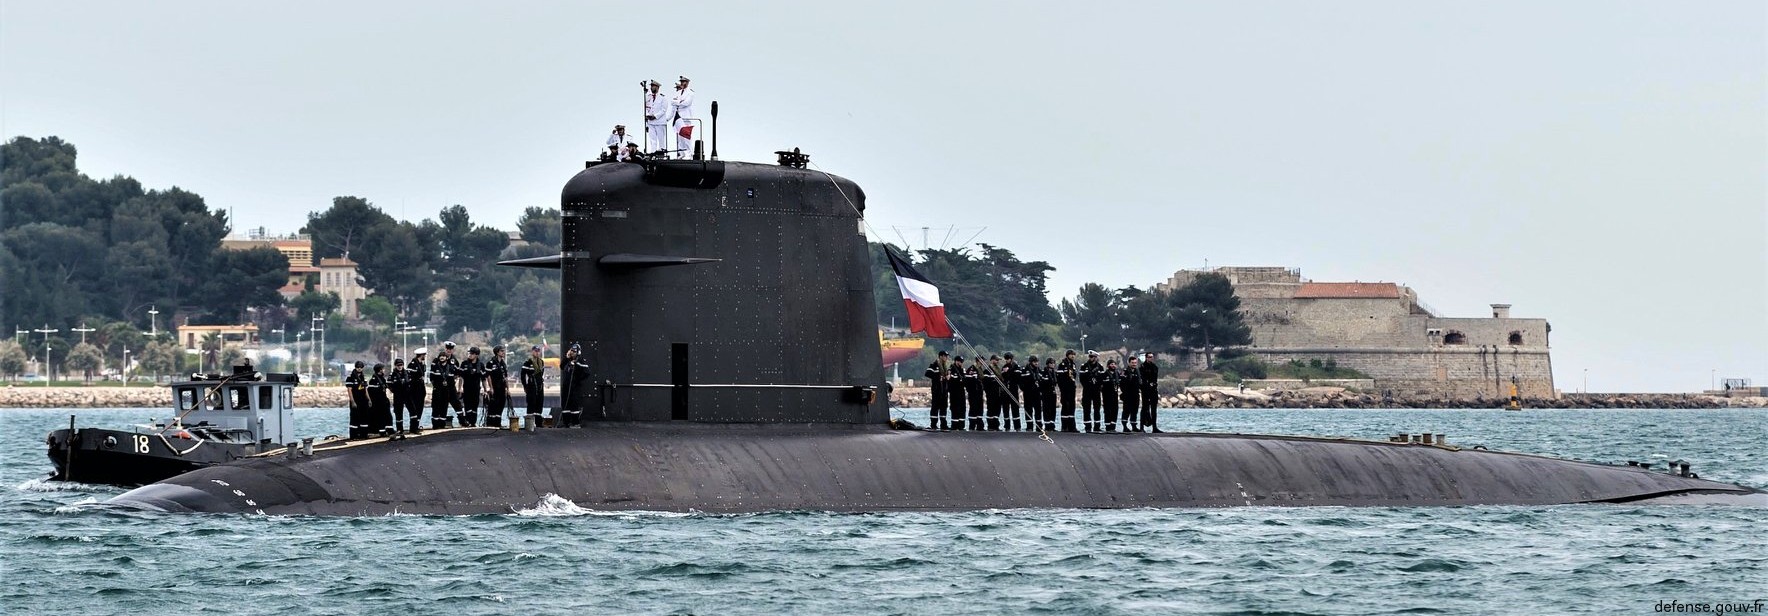 rubis class attack submarine ssn french navy marine nationale sna sous-marin nucleaire d'attaque 21